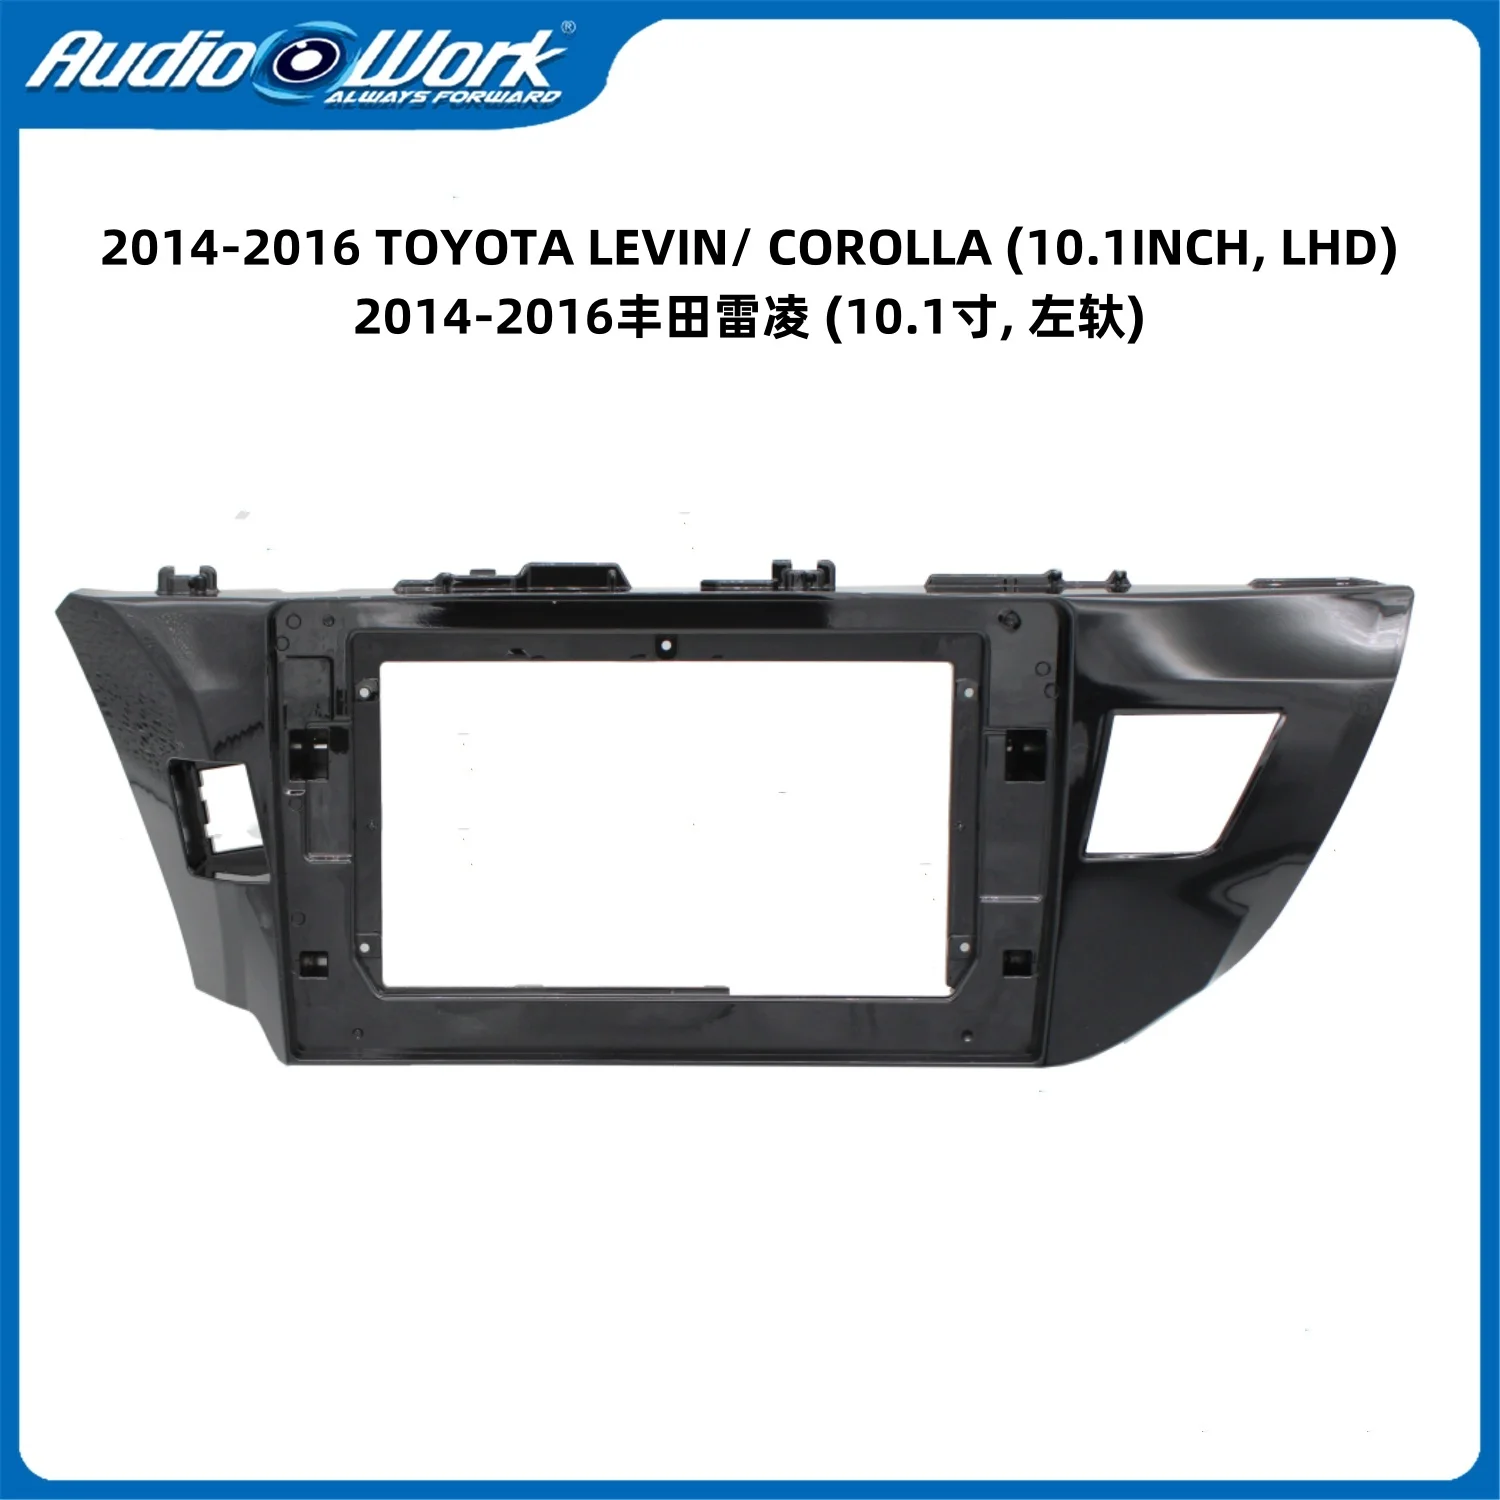 

Car Radio Fascia 10.1 inch for TOYOTA LEVIN 2014-2016 2 Din Stereo Player Install Surround Panel Dash Kit GPS Frame